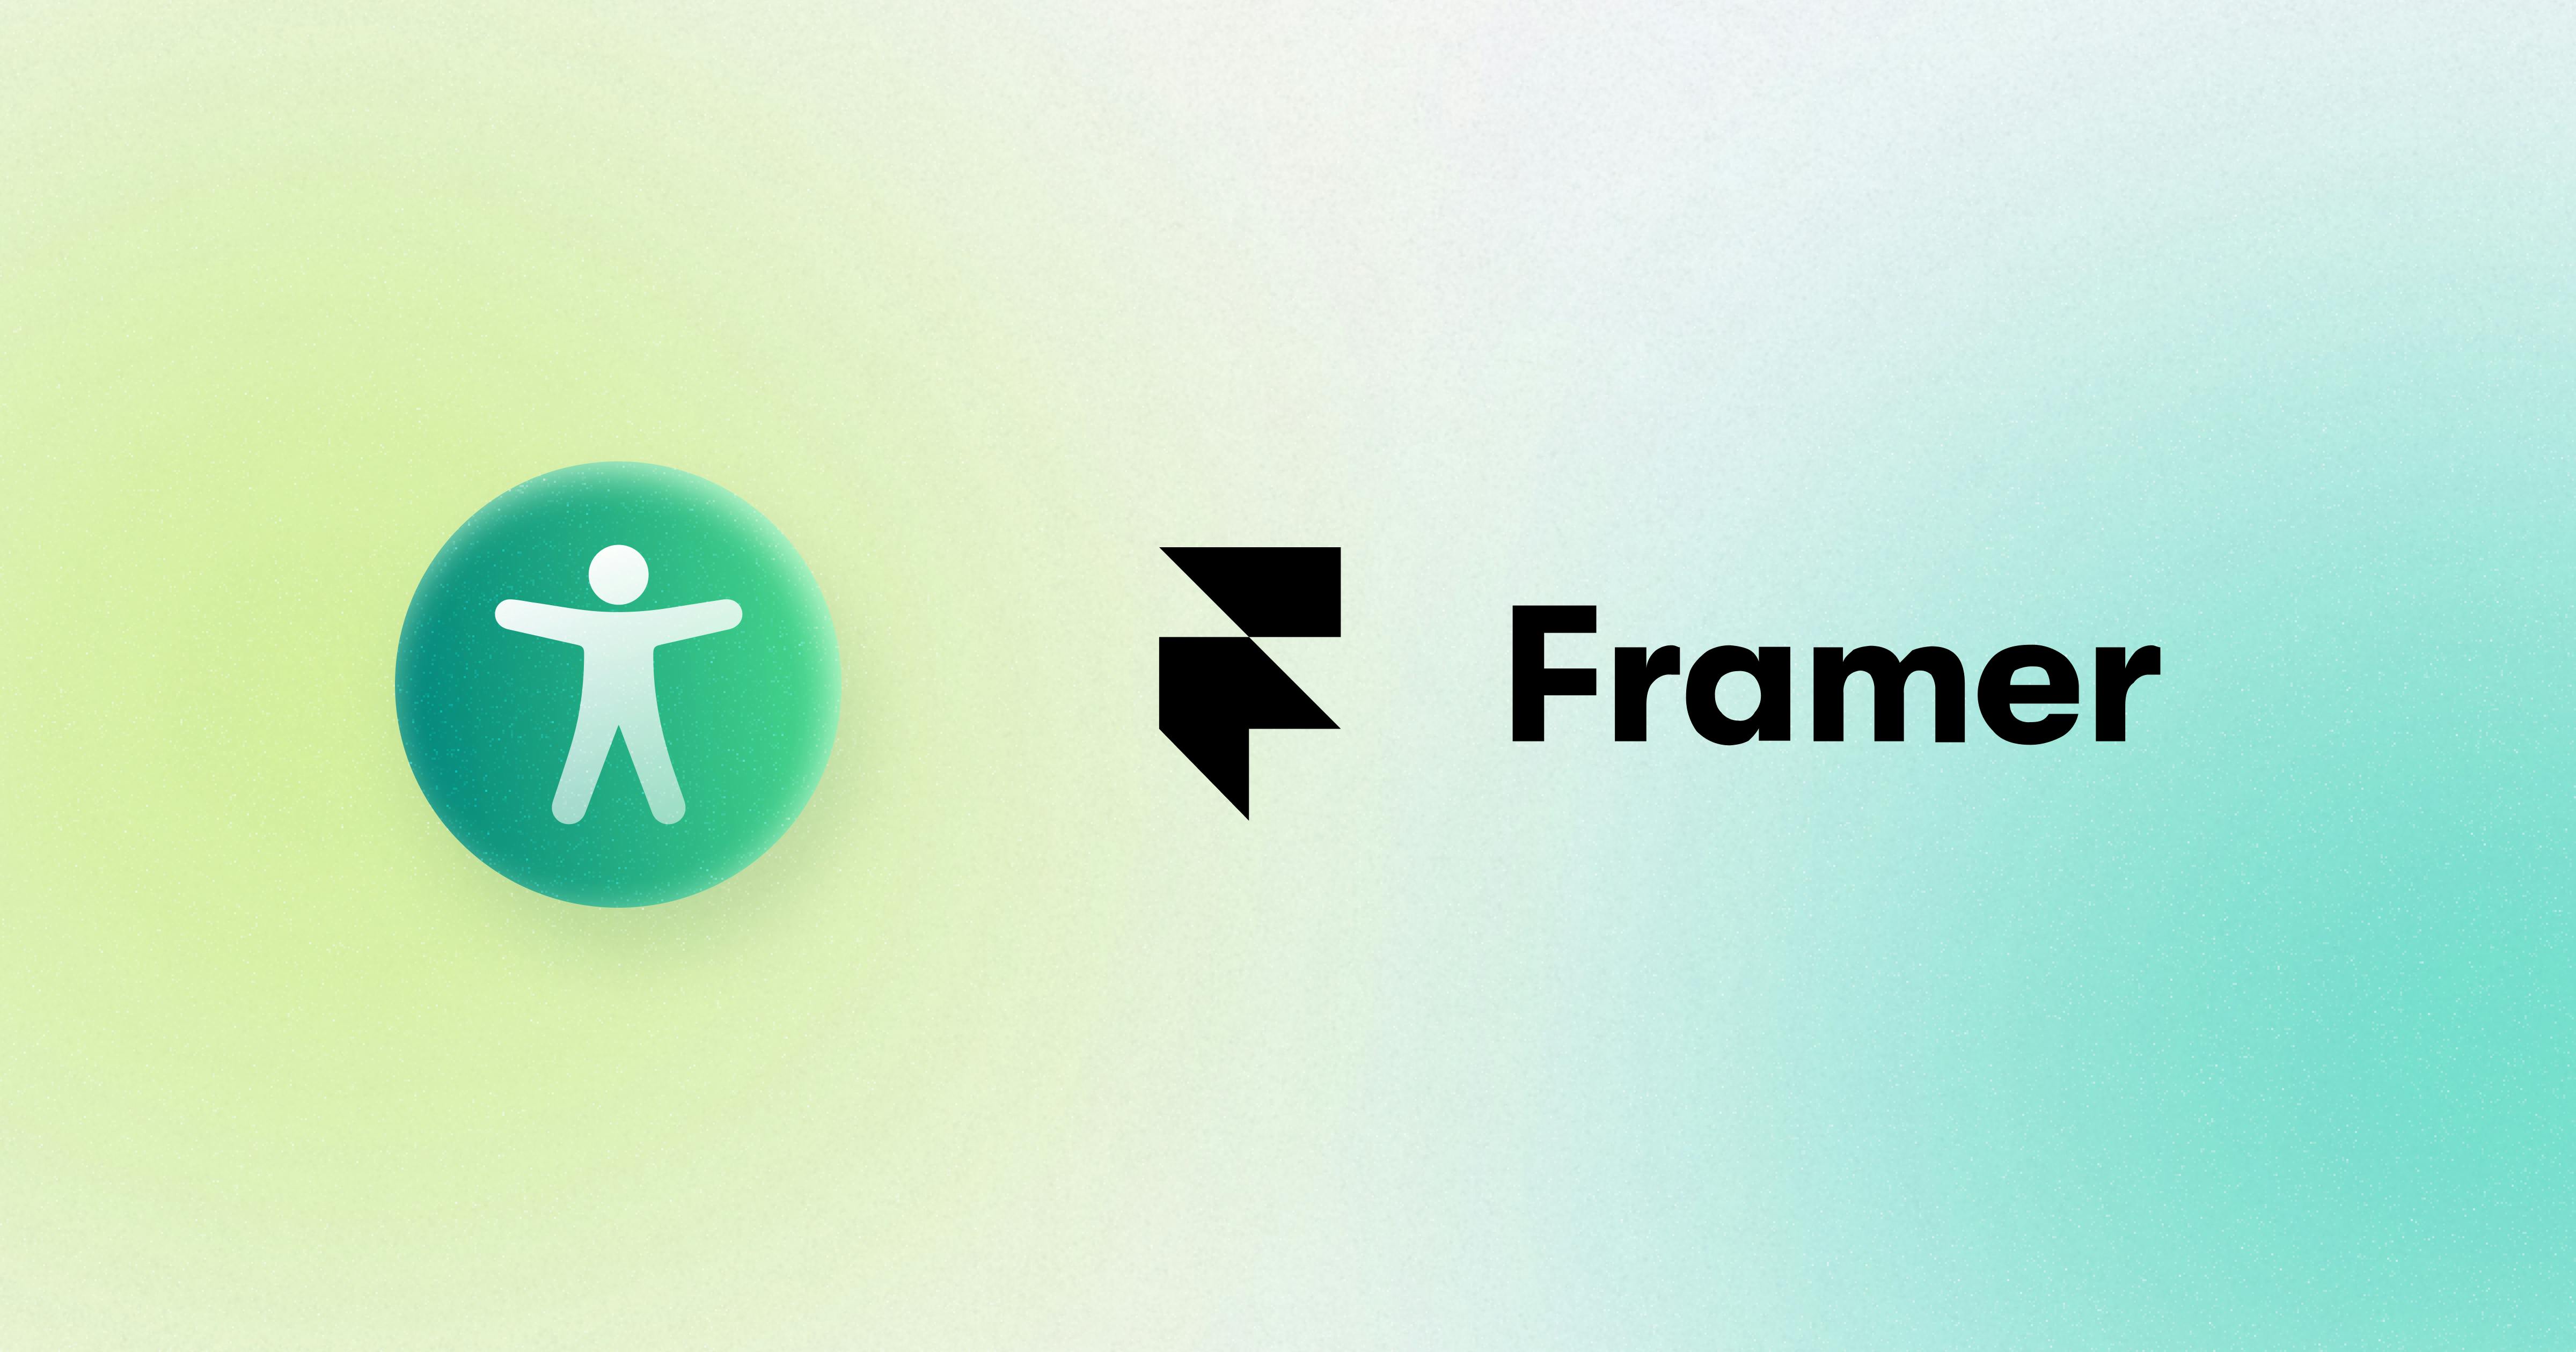 A green accessibility symbol next to the icon for Framer, a no-code web builder.